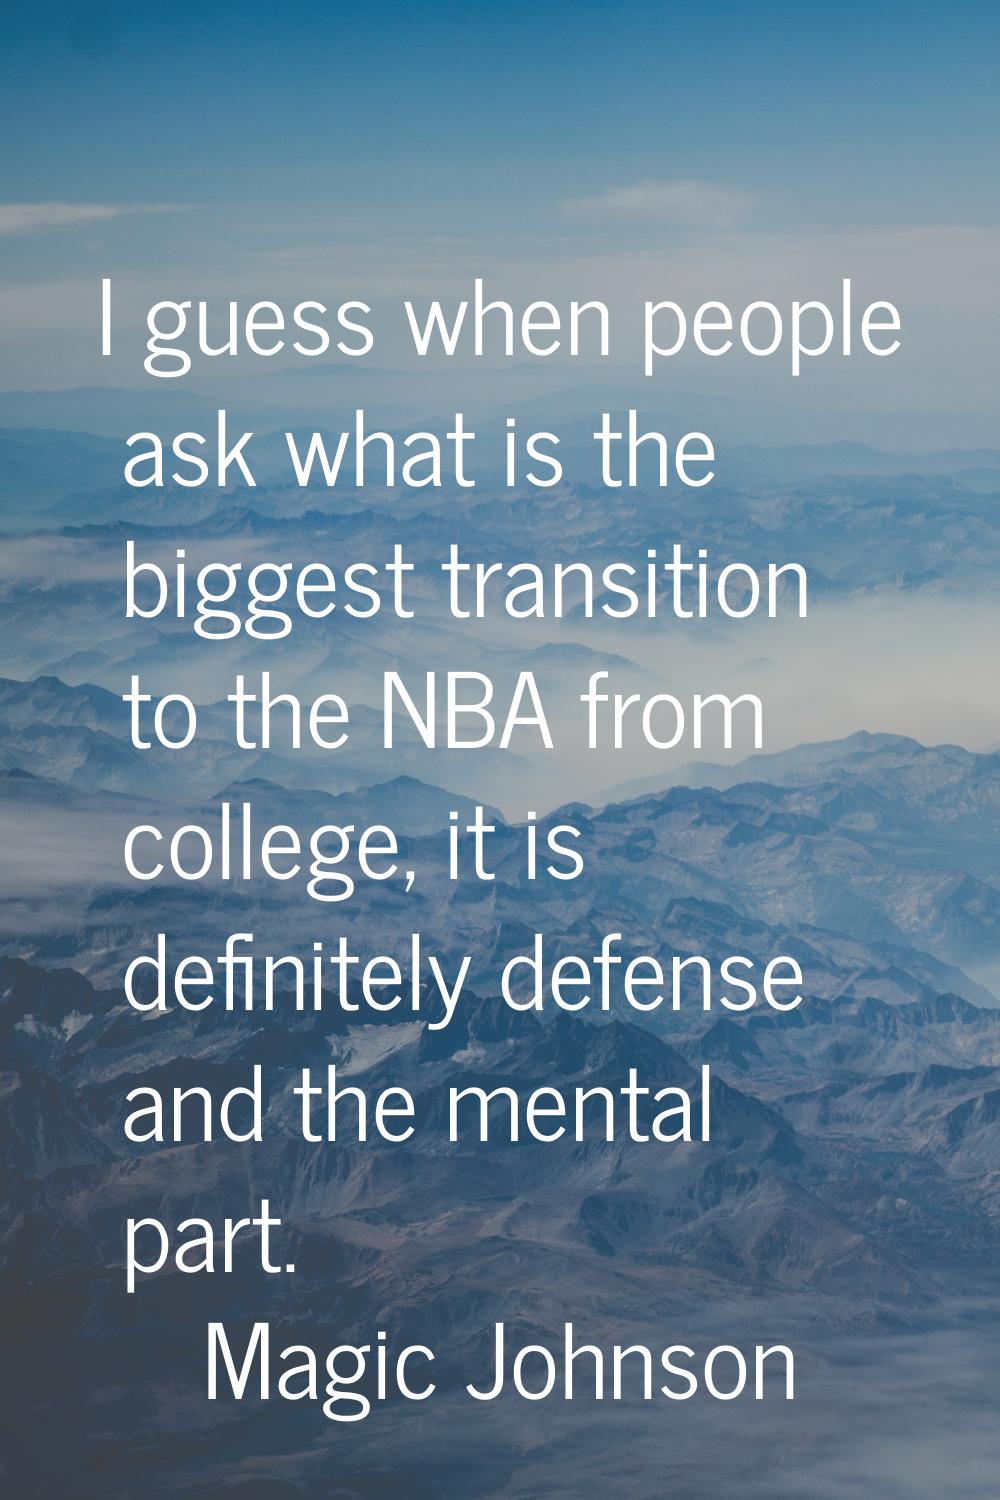 I guess when people ask what is the biggest transition to the NBA from college, it is definitely de